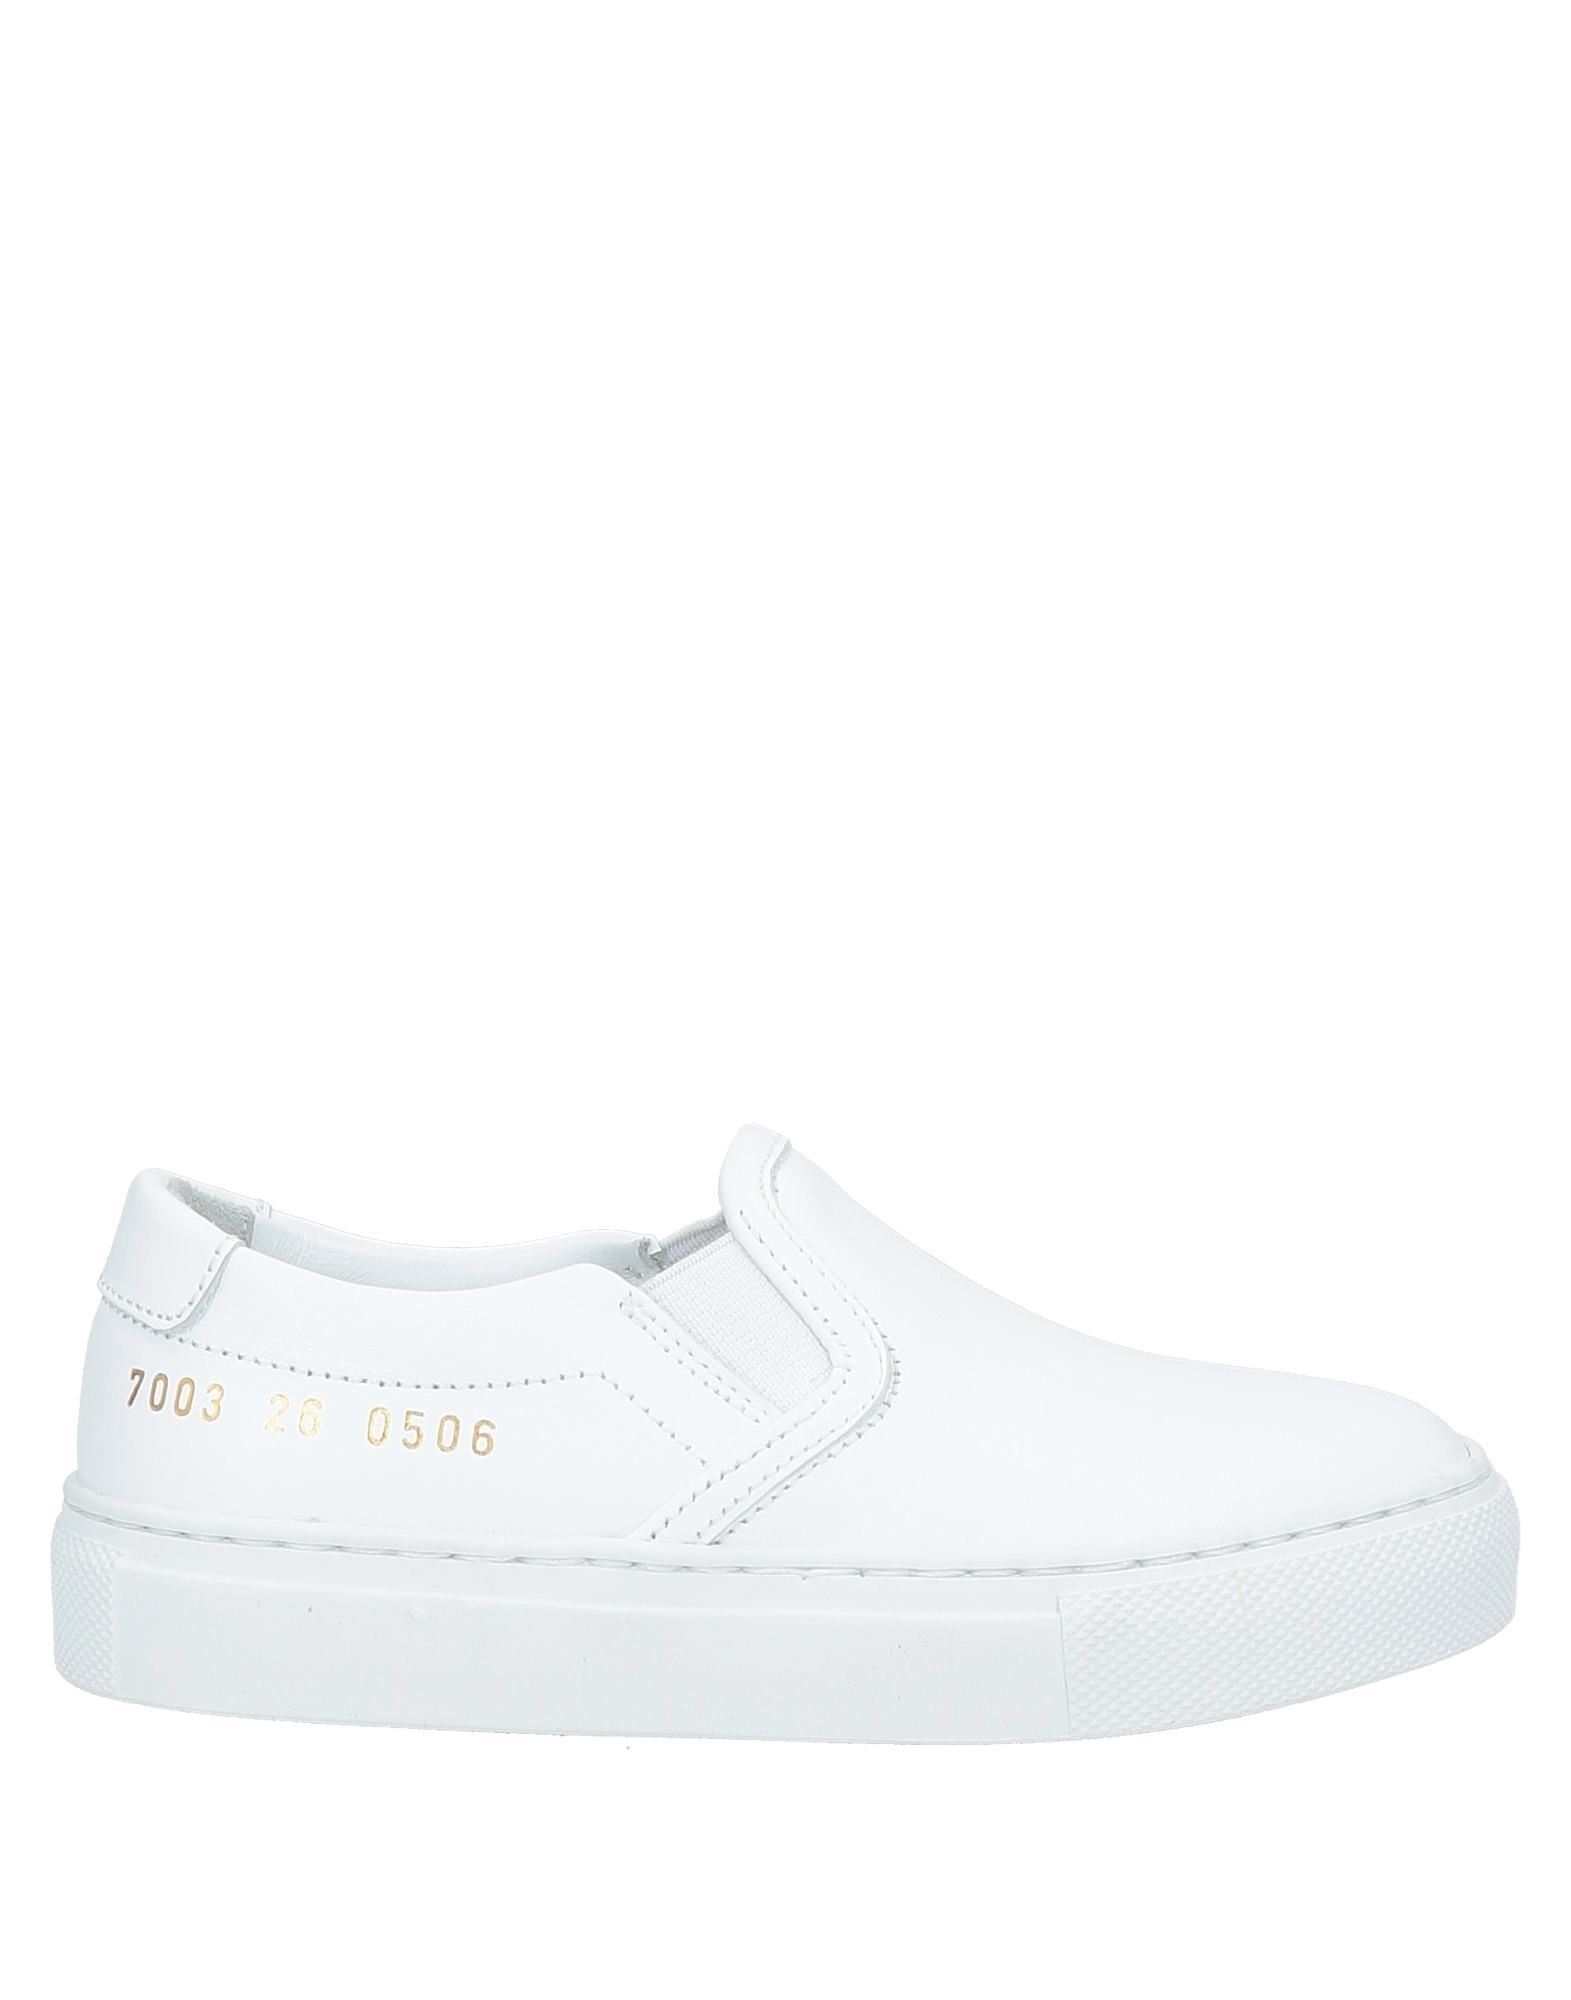 COMMON PROJECTS Sneakers Kinder Weiß von COMMON PROJECTS